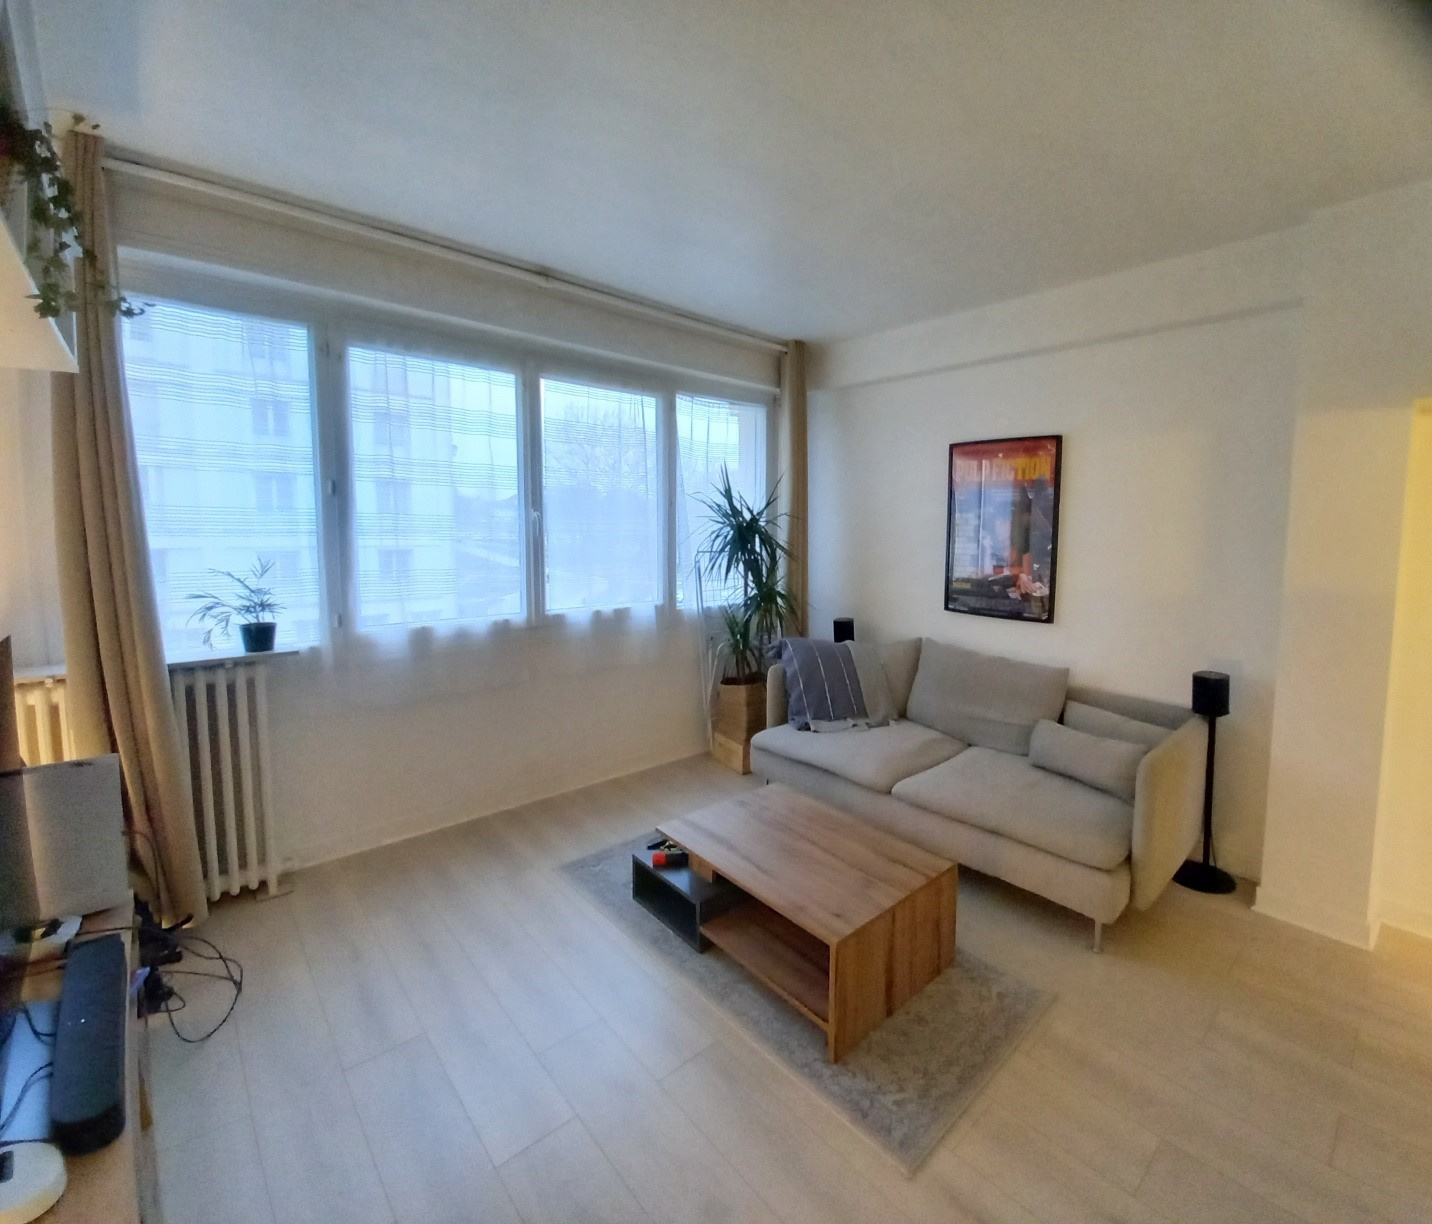 for sale flat in BAYONNE - 175 000